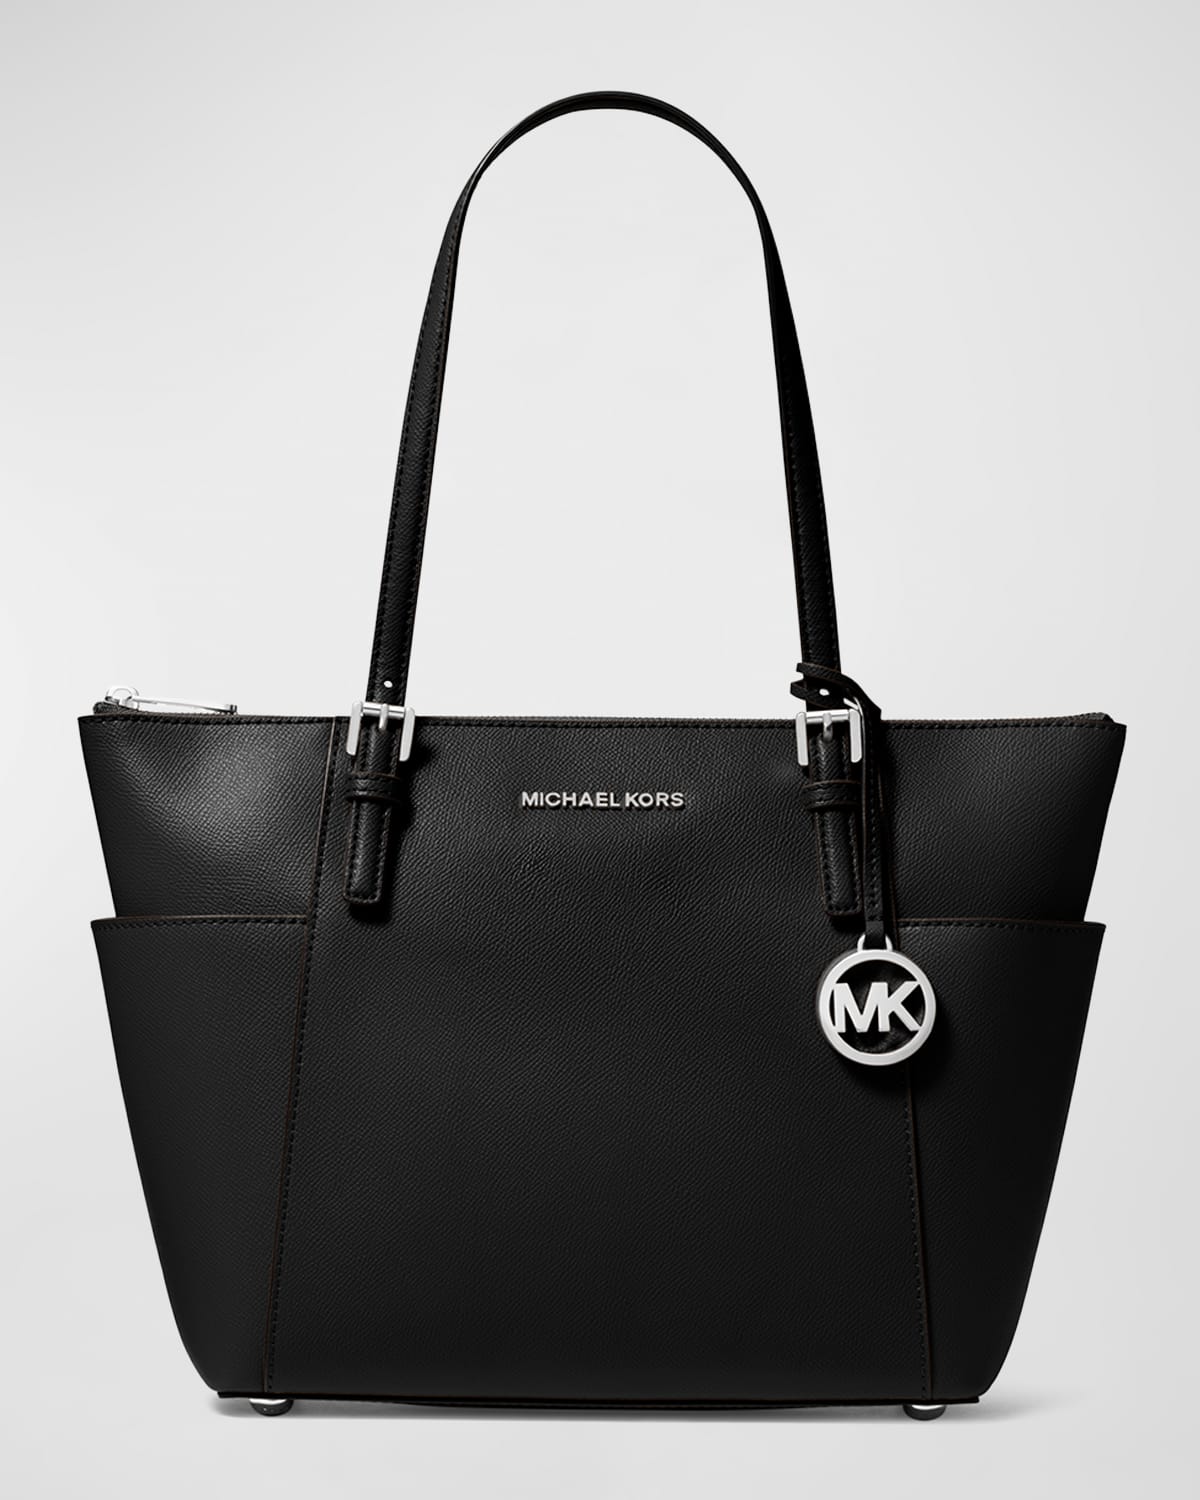 East-West Zip Leather Tote Bag